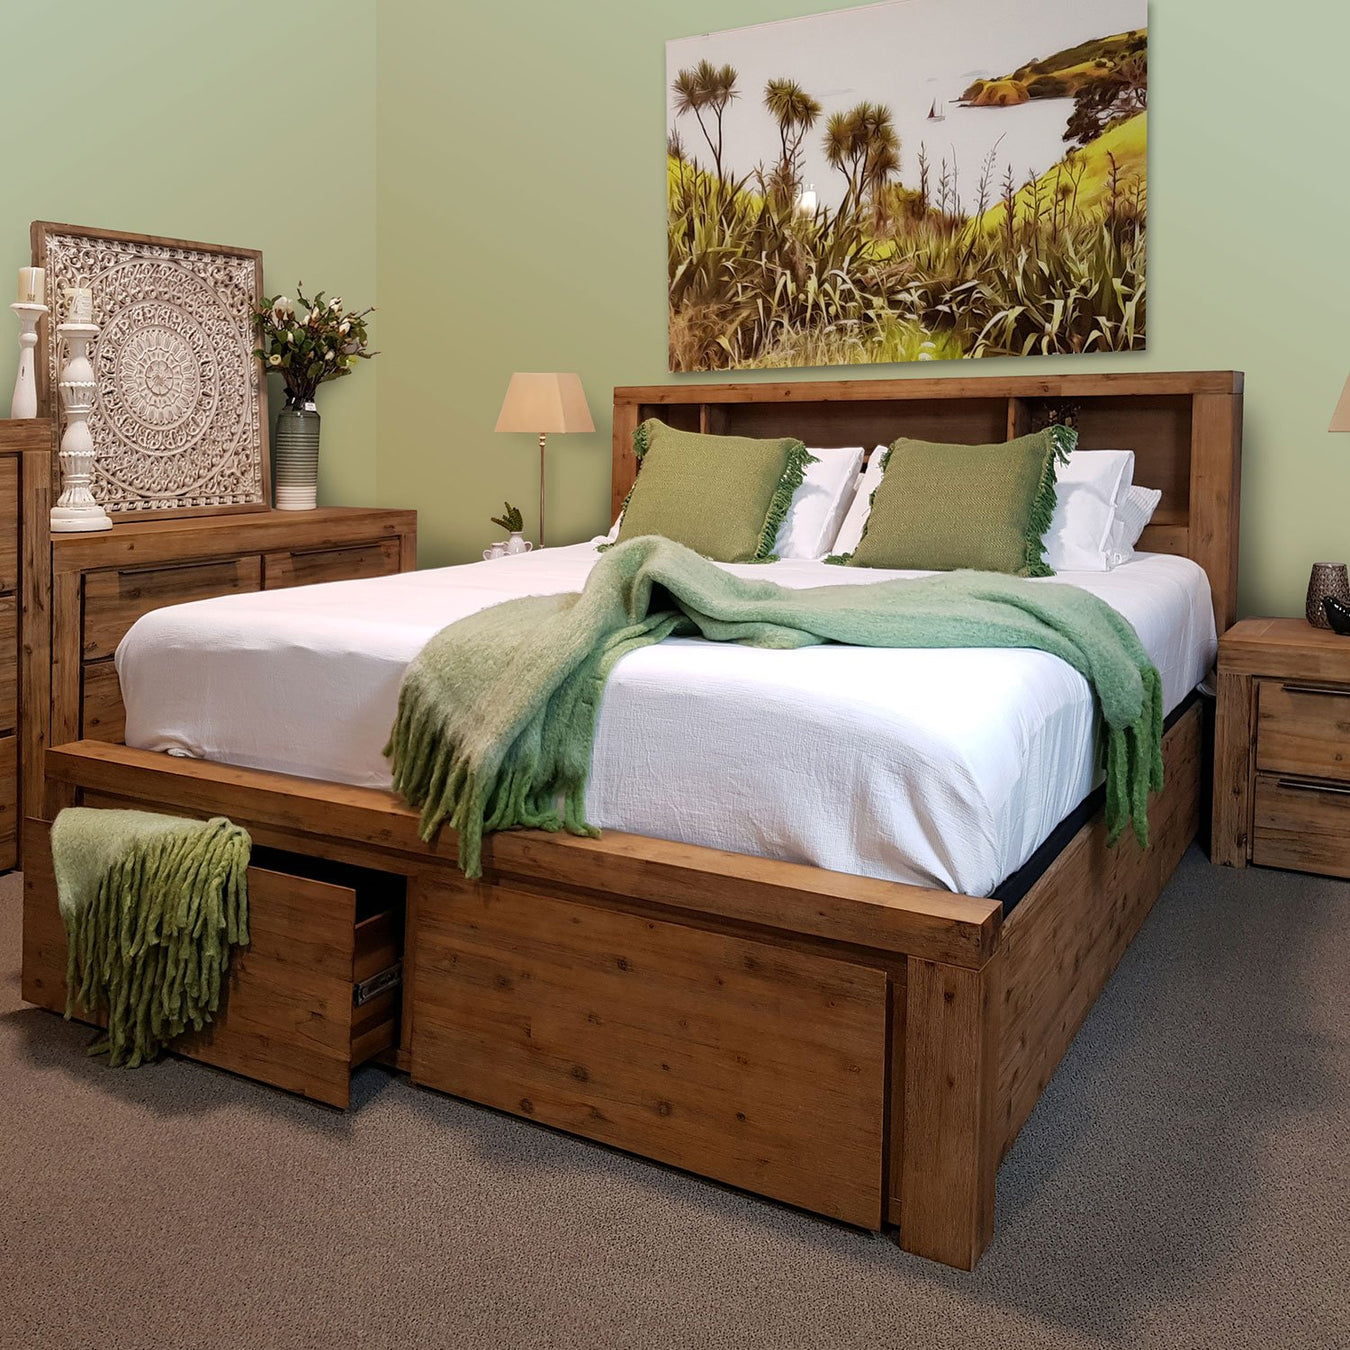 Wooden bed frame with 2 drawers storage and headboard cape Collection The Bed Shop